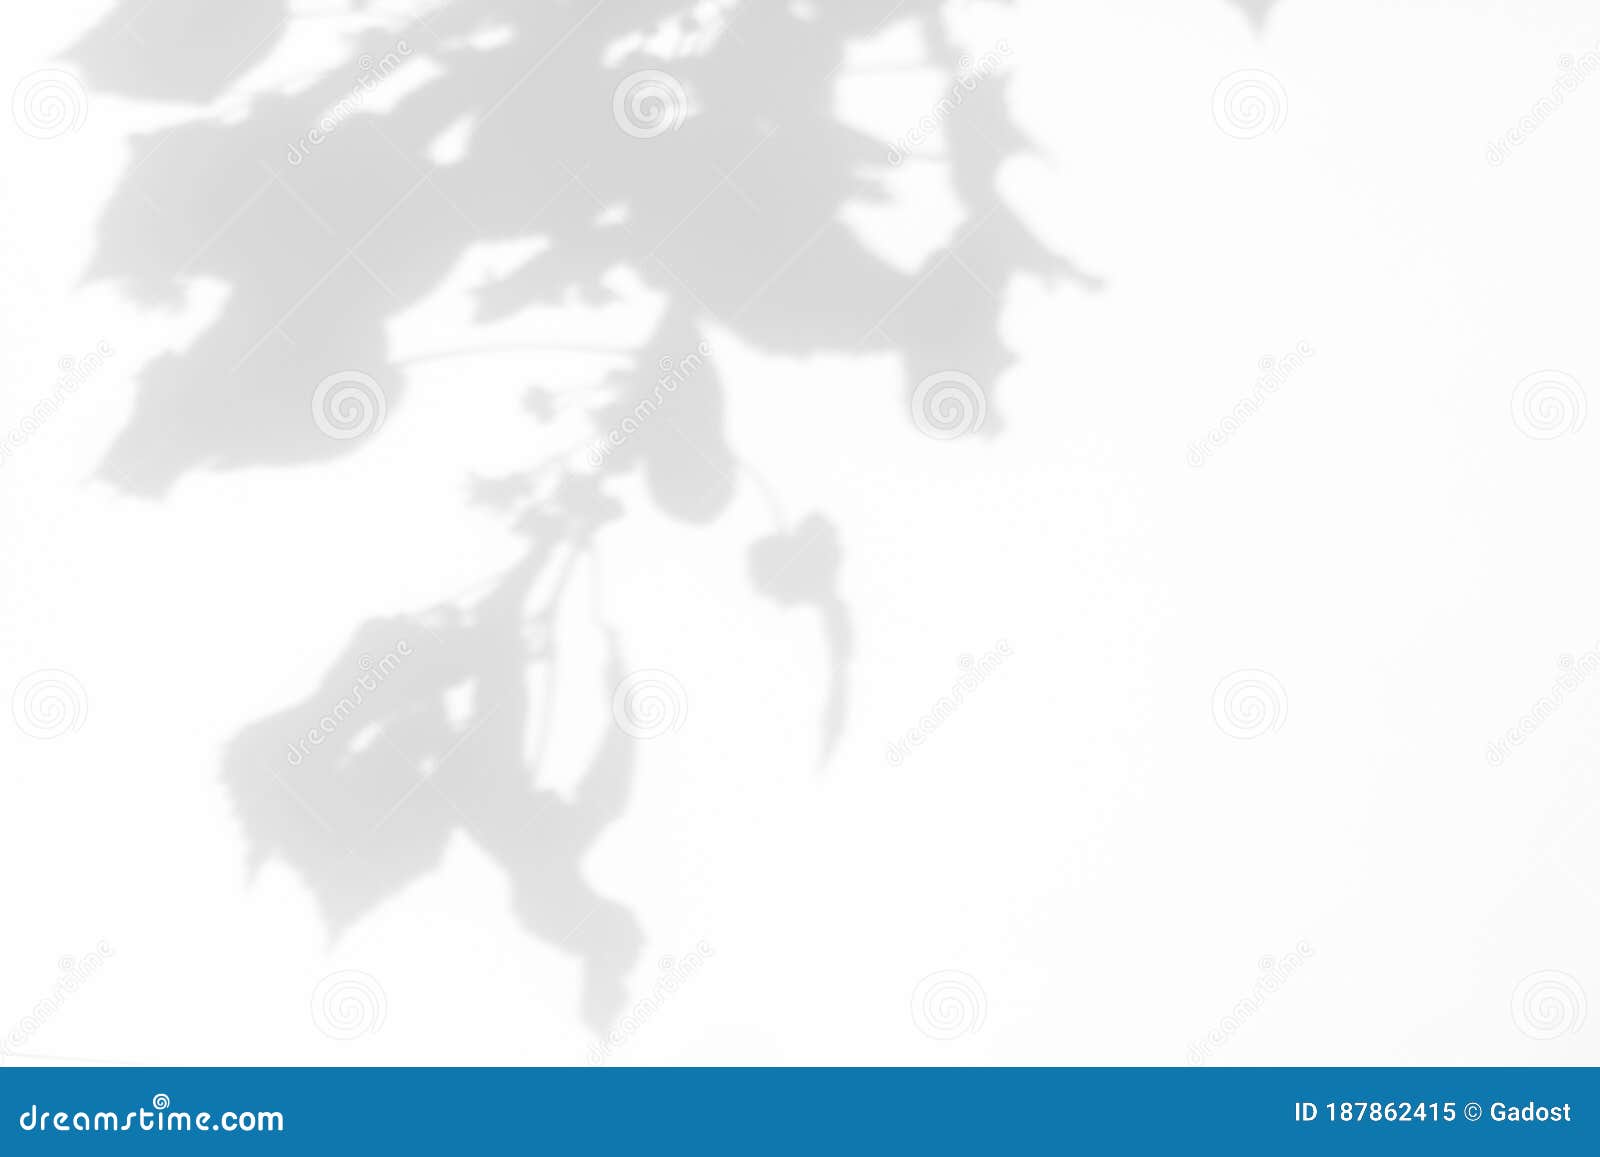 Shadows of the Tree Branches on a White Wall Stock Image - Image of